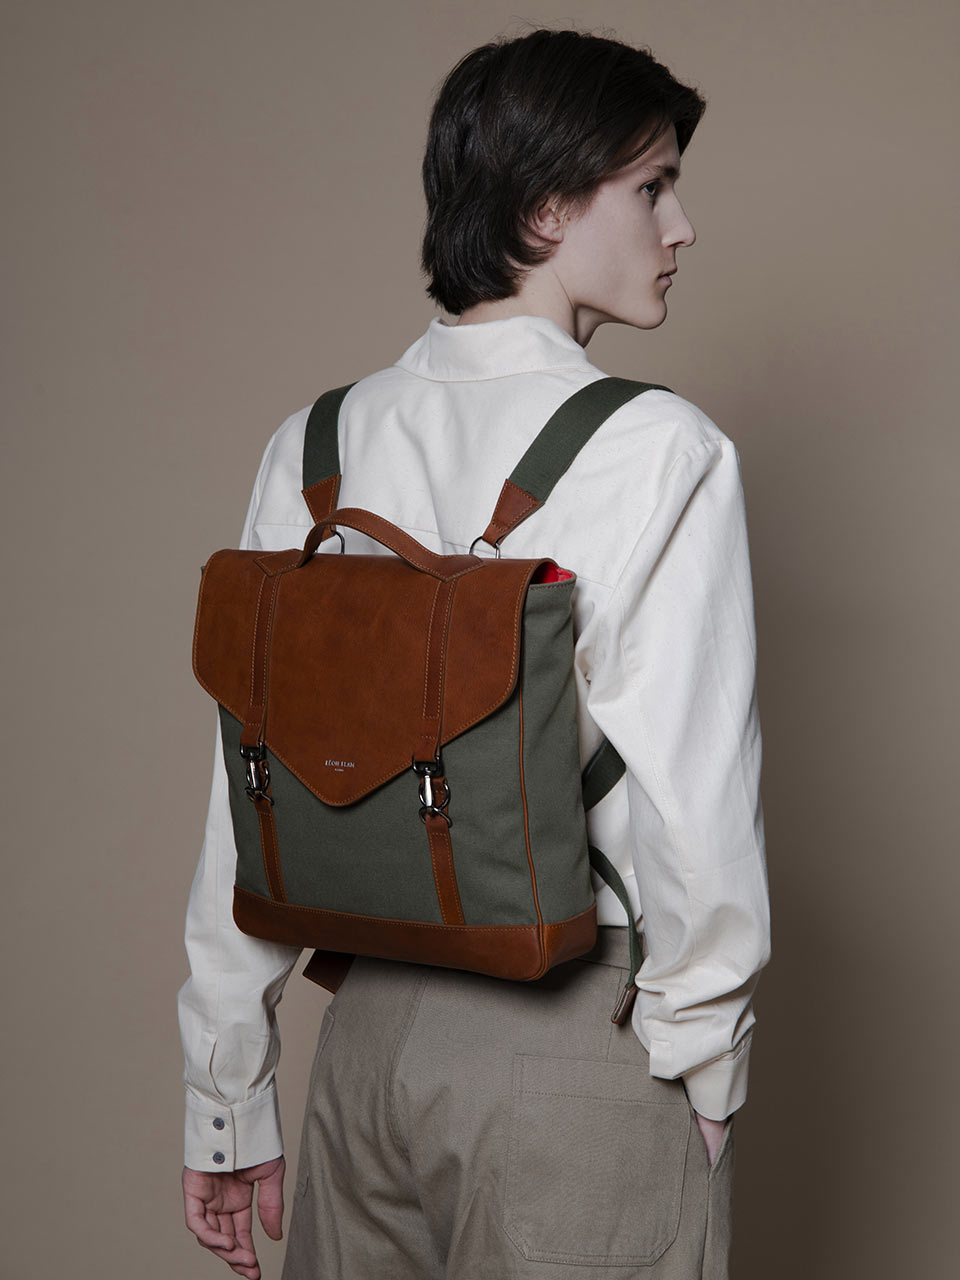 Sac a dos Homme toile et cuir I Inspiration outdoor I Made in France